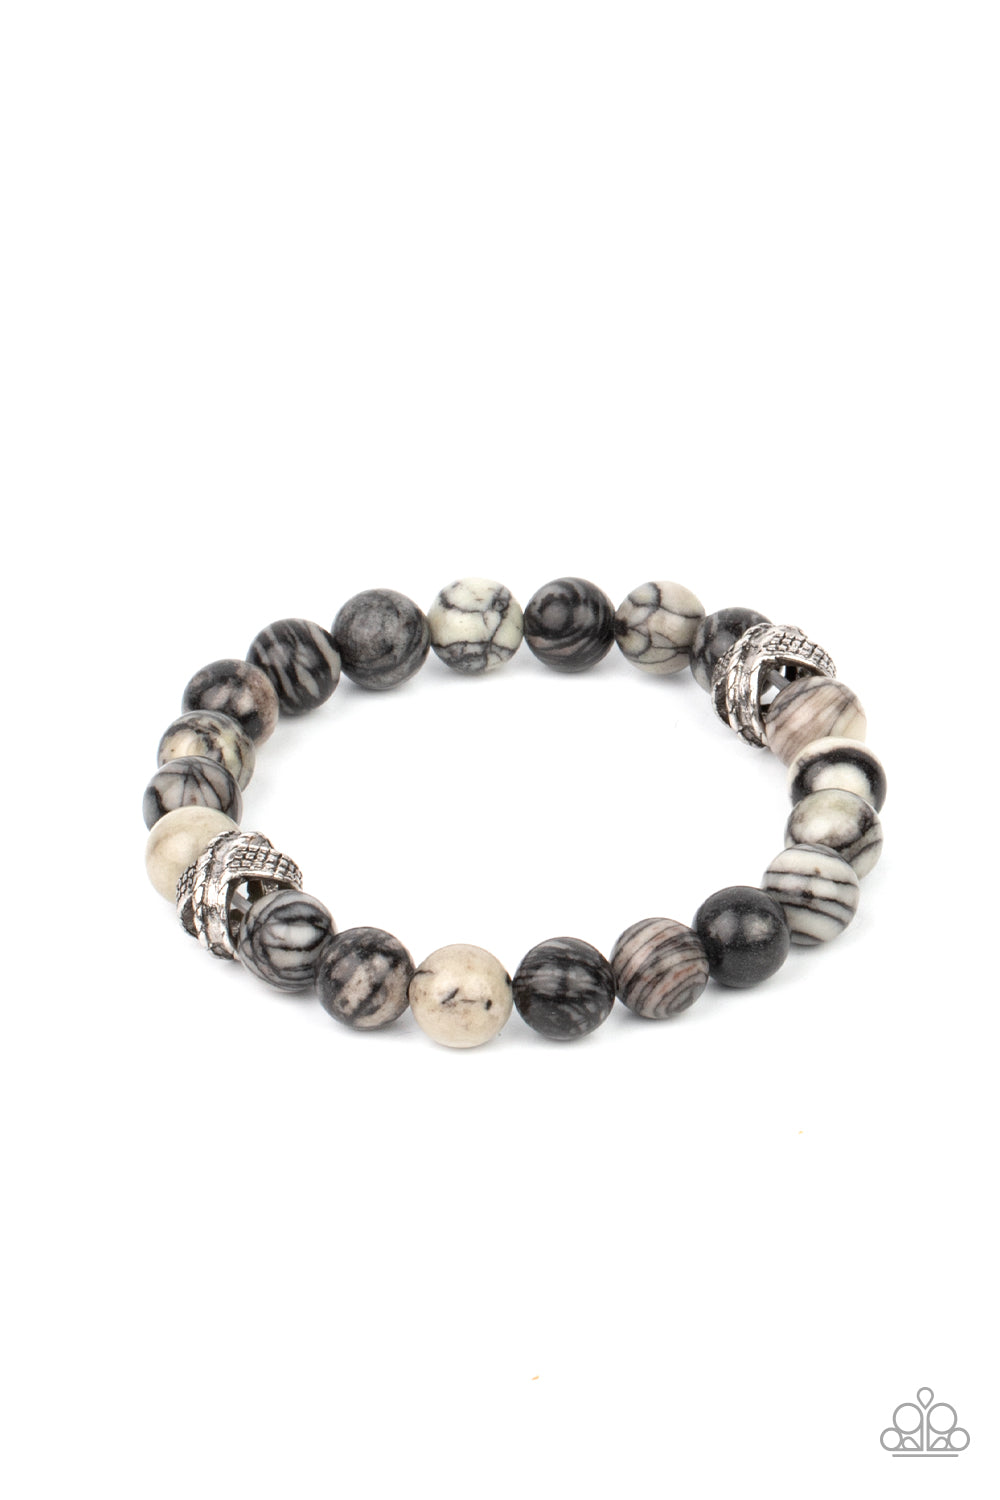 Infused with textured silver accents, an earthy collection of swirling black and white stones are threaded along a stretchy band around the wrist for a seasonal fashion.